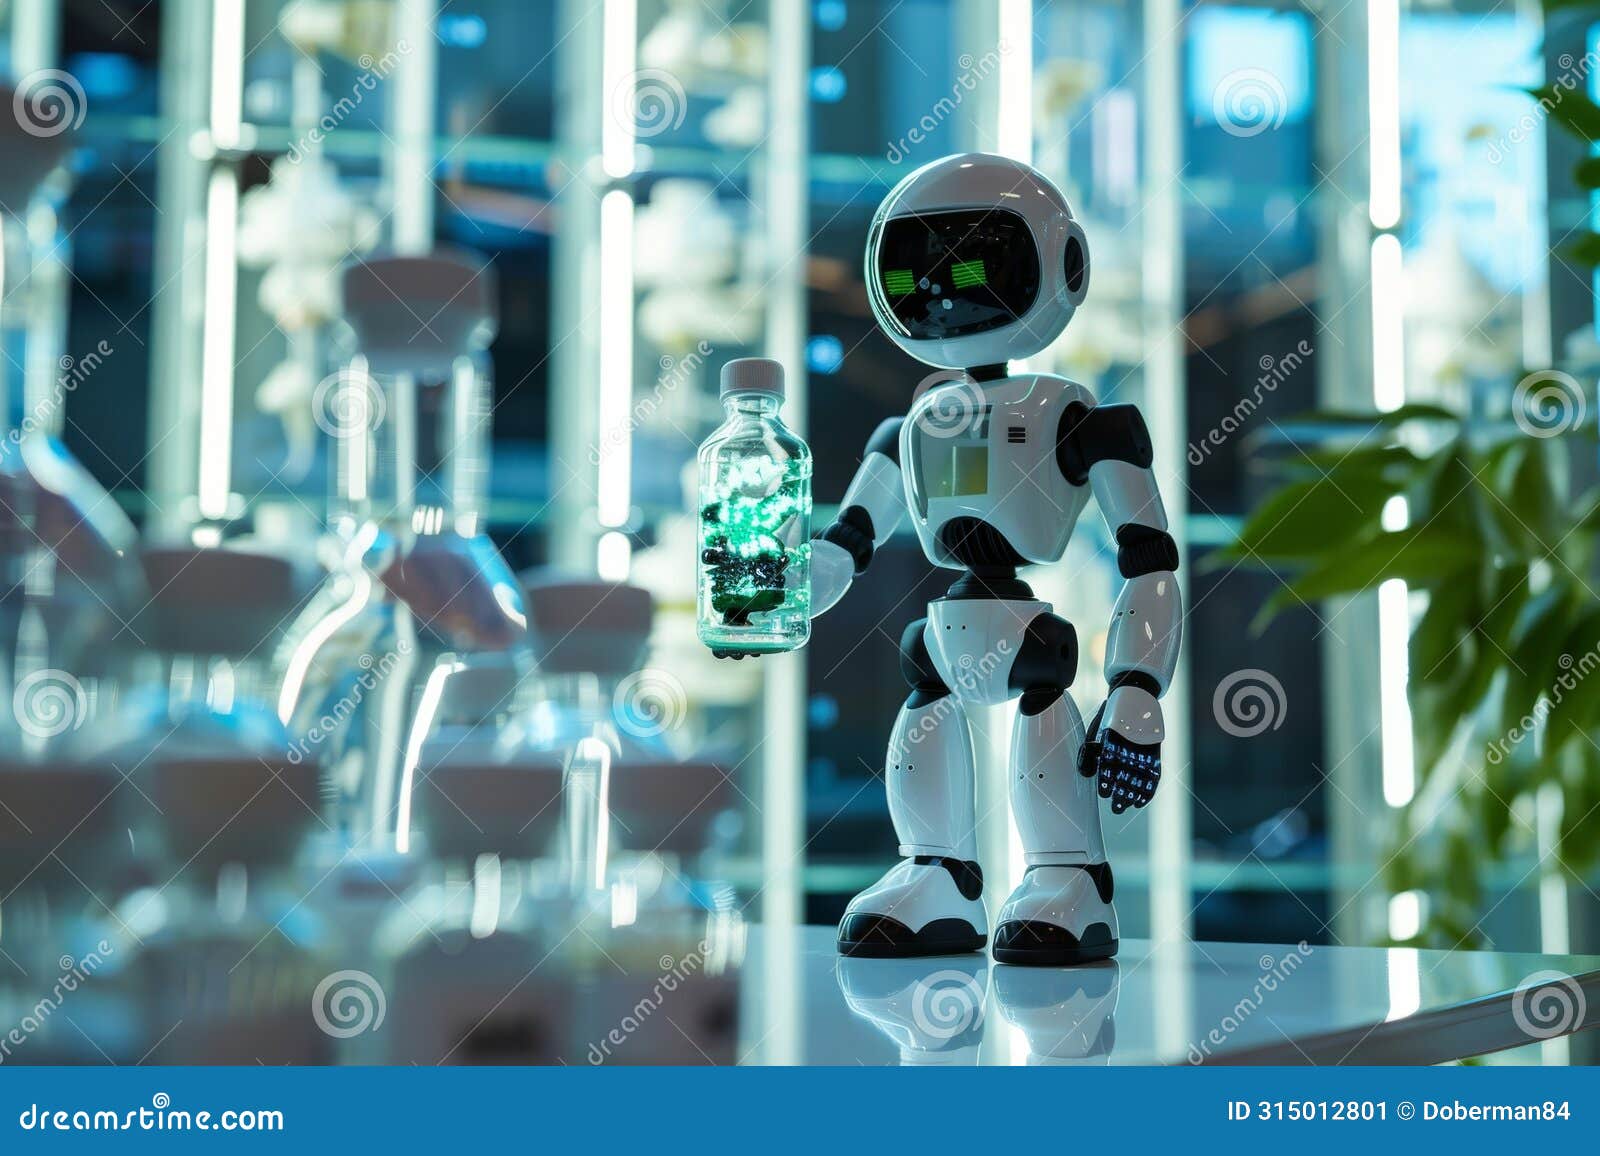 futuristic robot holding a bottle with a microenvironment in a modern office